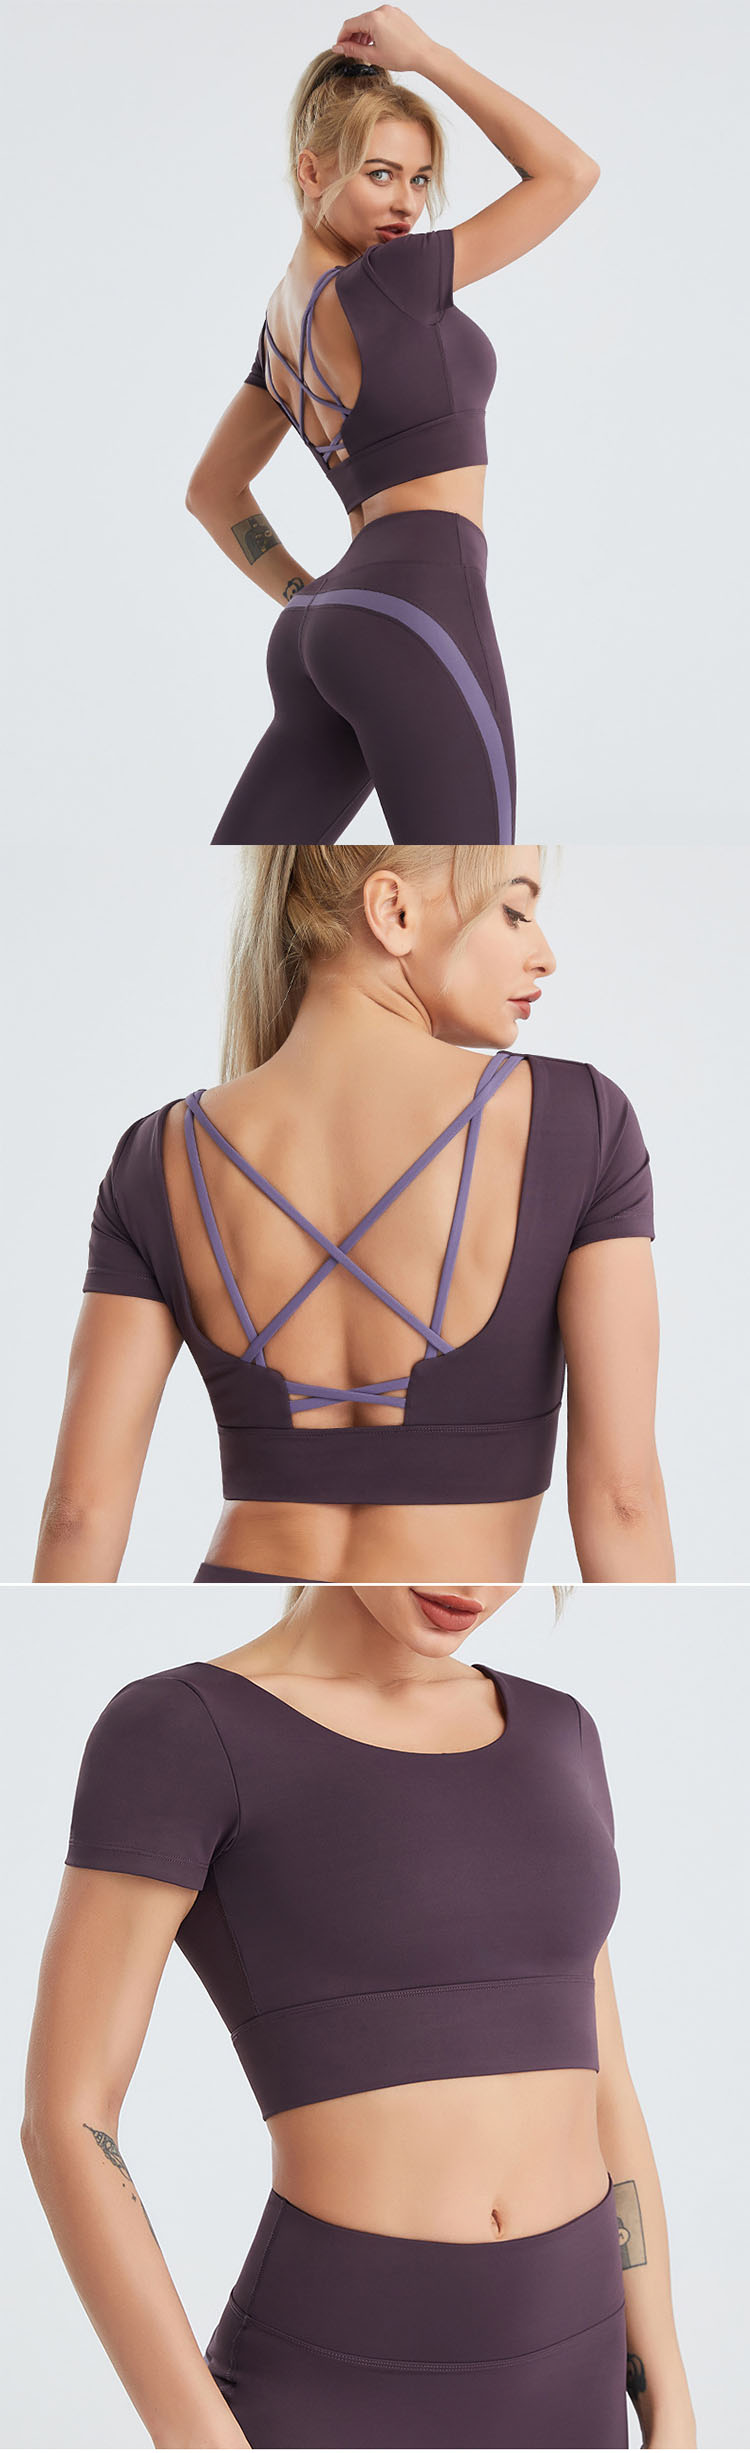 While focusing on practical and versatile flow yoga wear